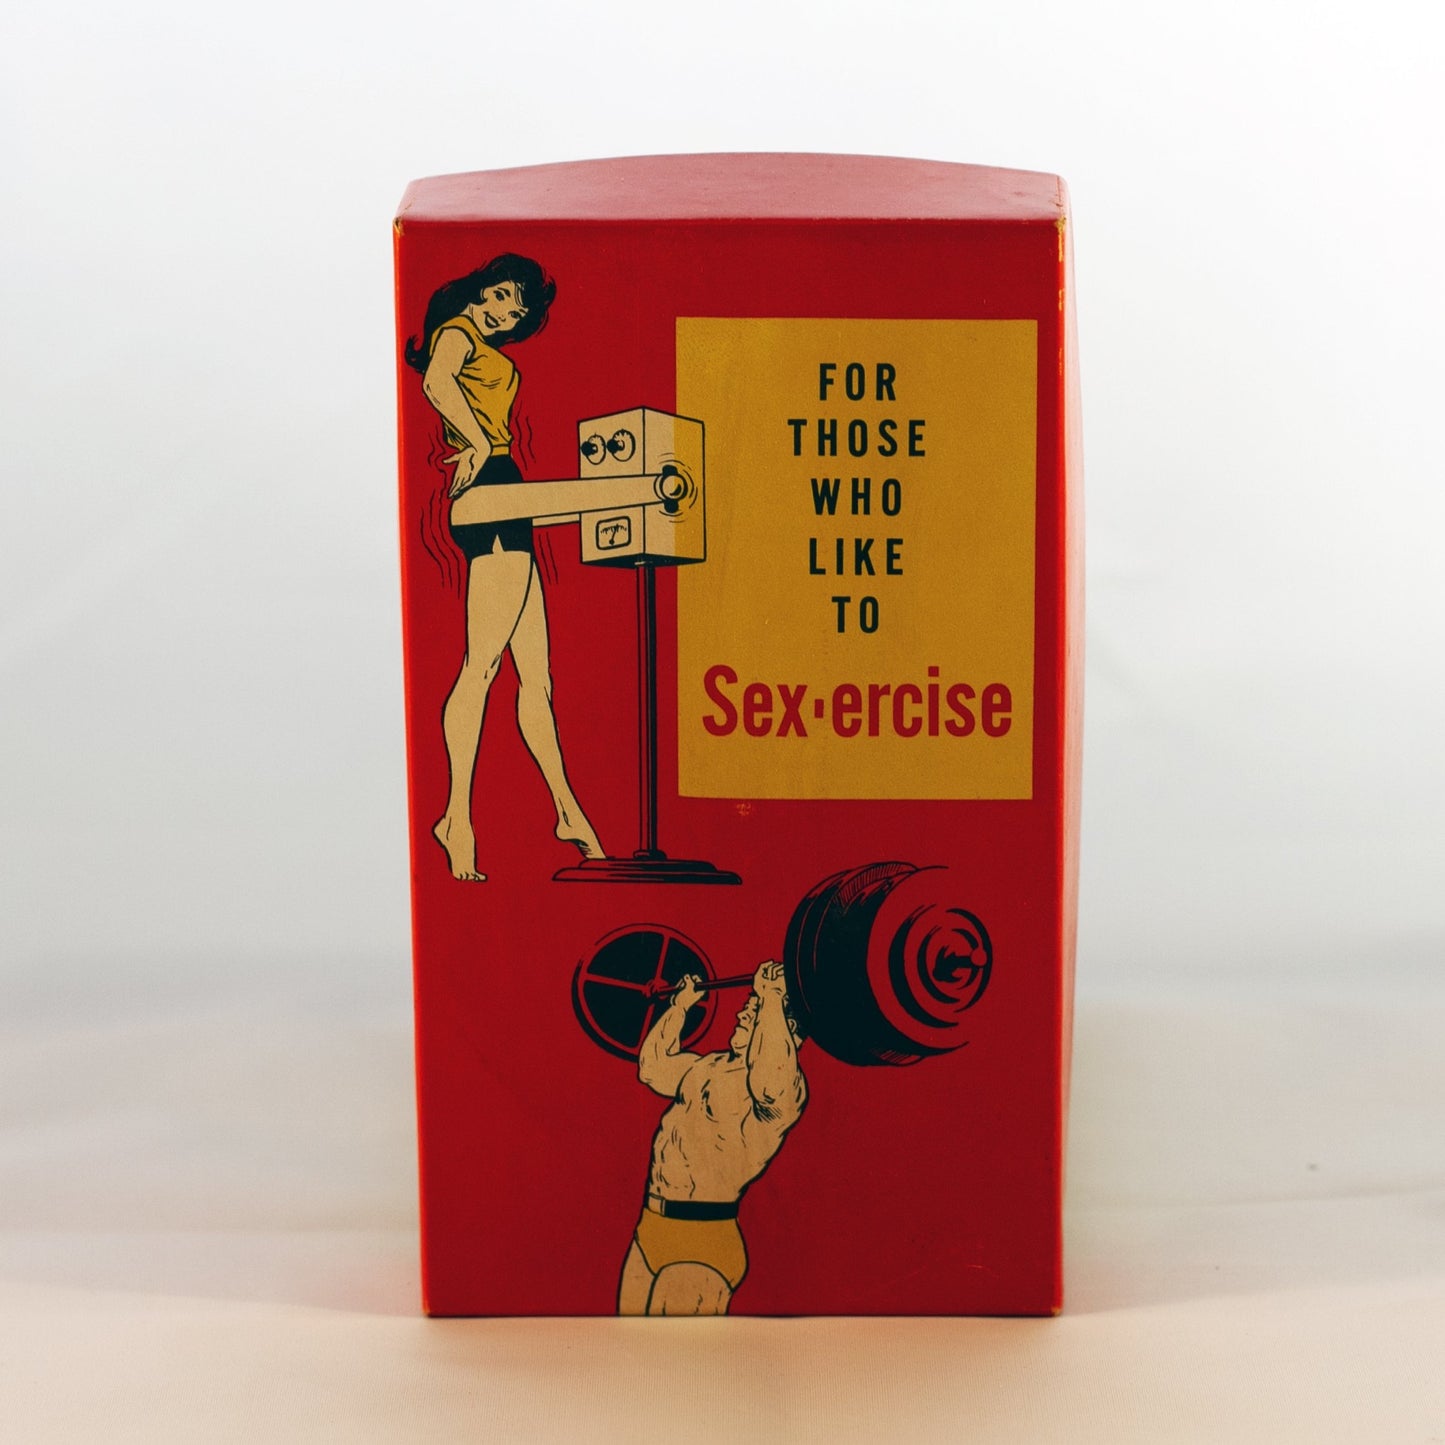 "FOR THOSE WHO LIKE TO SEX-ERCISE" Risqué Gag Gift Circa 1950s Made by Golden's Magic Wand